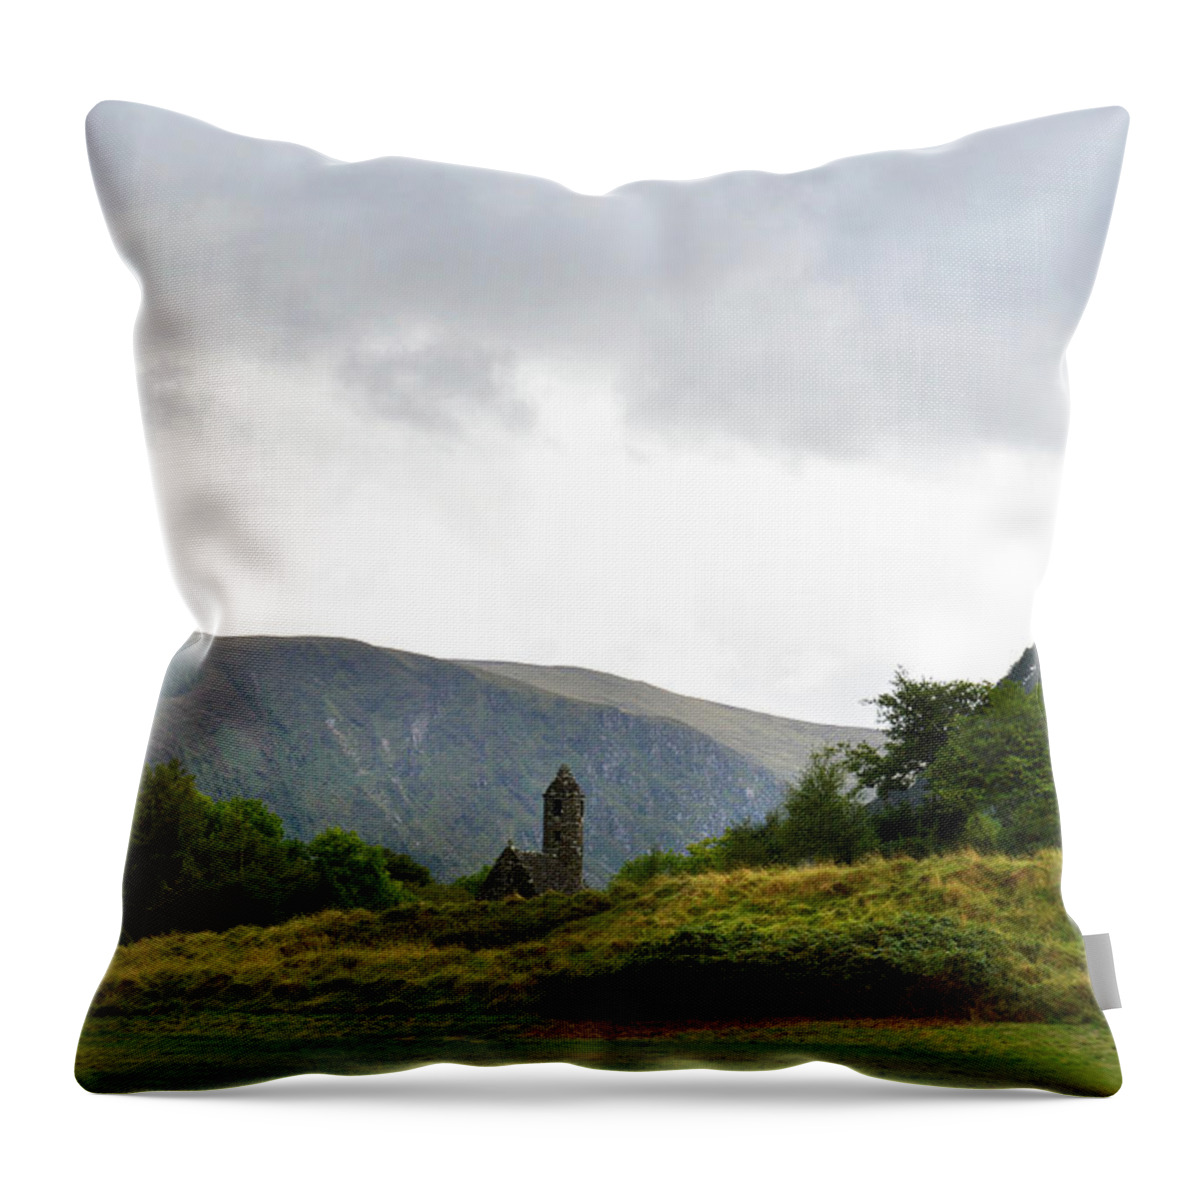 Ireland Throw Pillow featuring the photograph Wicklow Mountains by Terence Davis